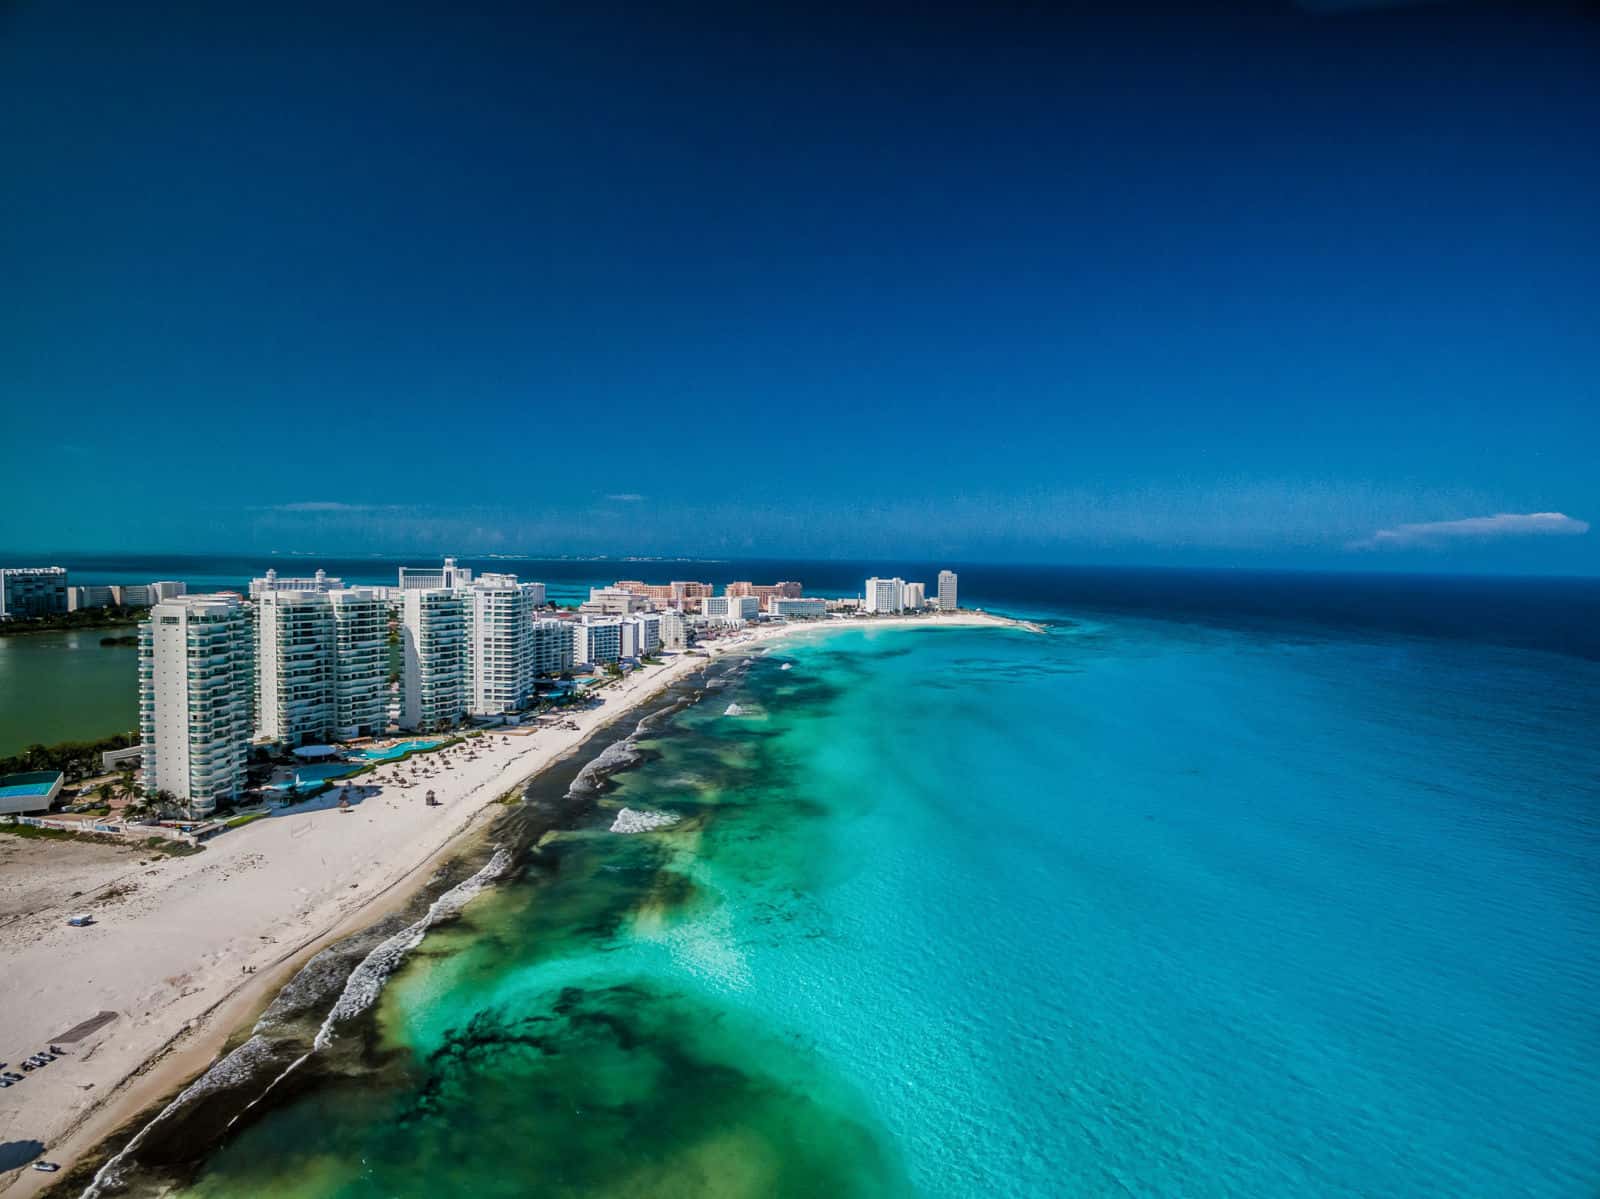 is february good time to visit cancun